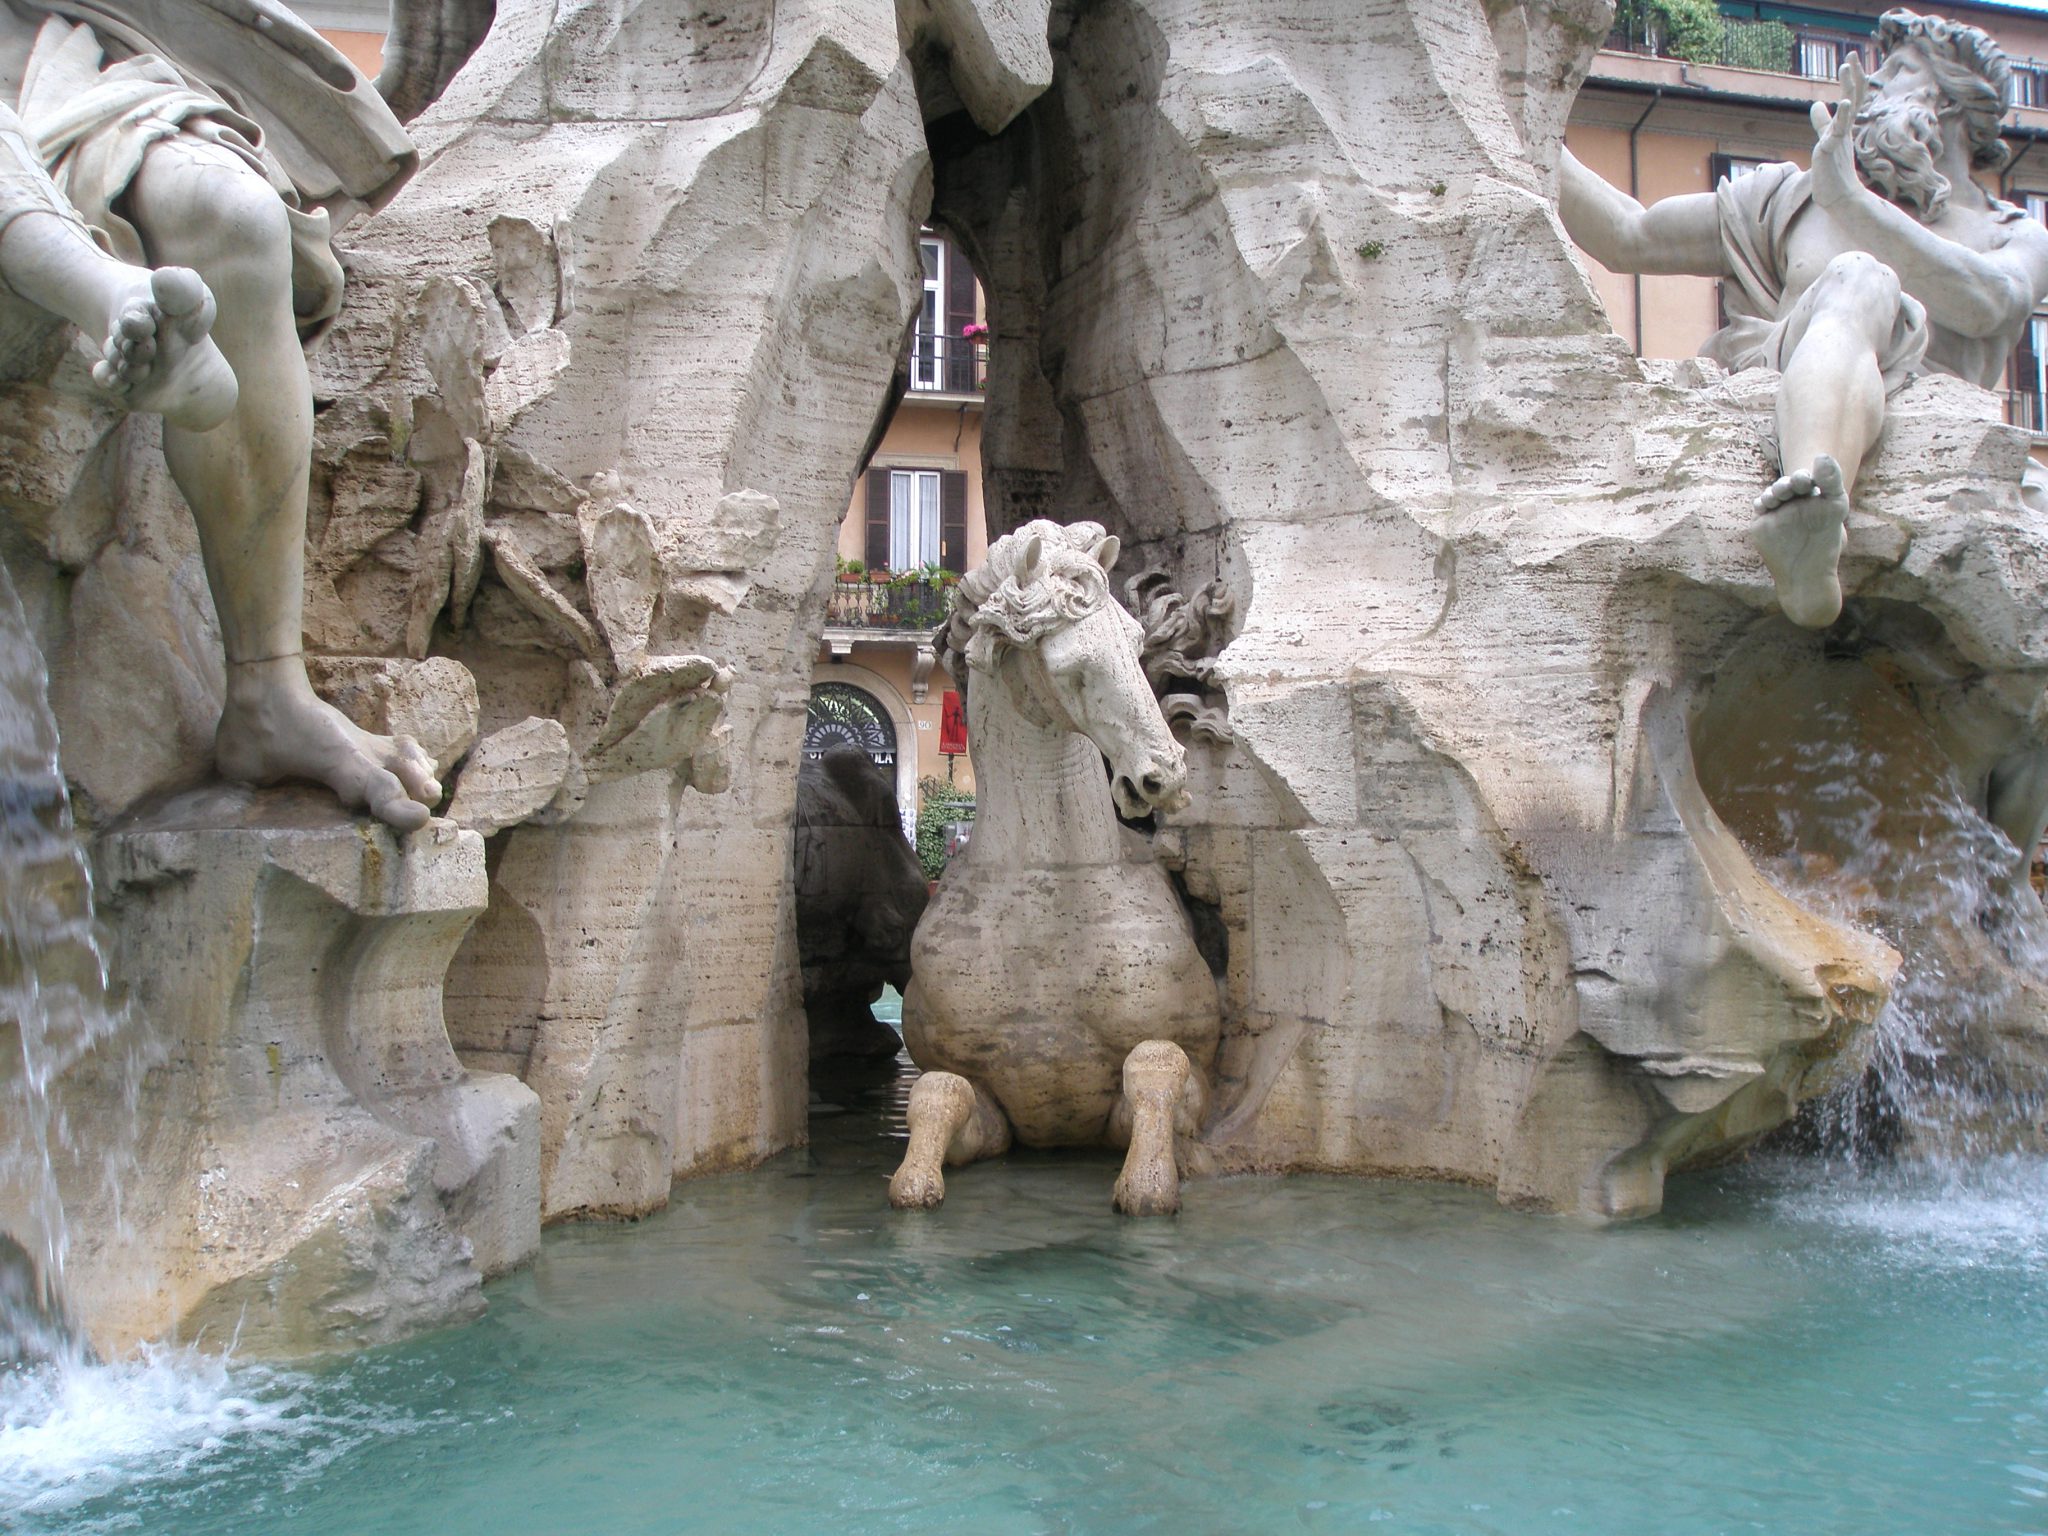 We're back to our rainy morning in May with a detail of Bernini's ingeniously-carved travertine base.